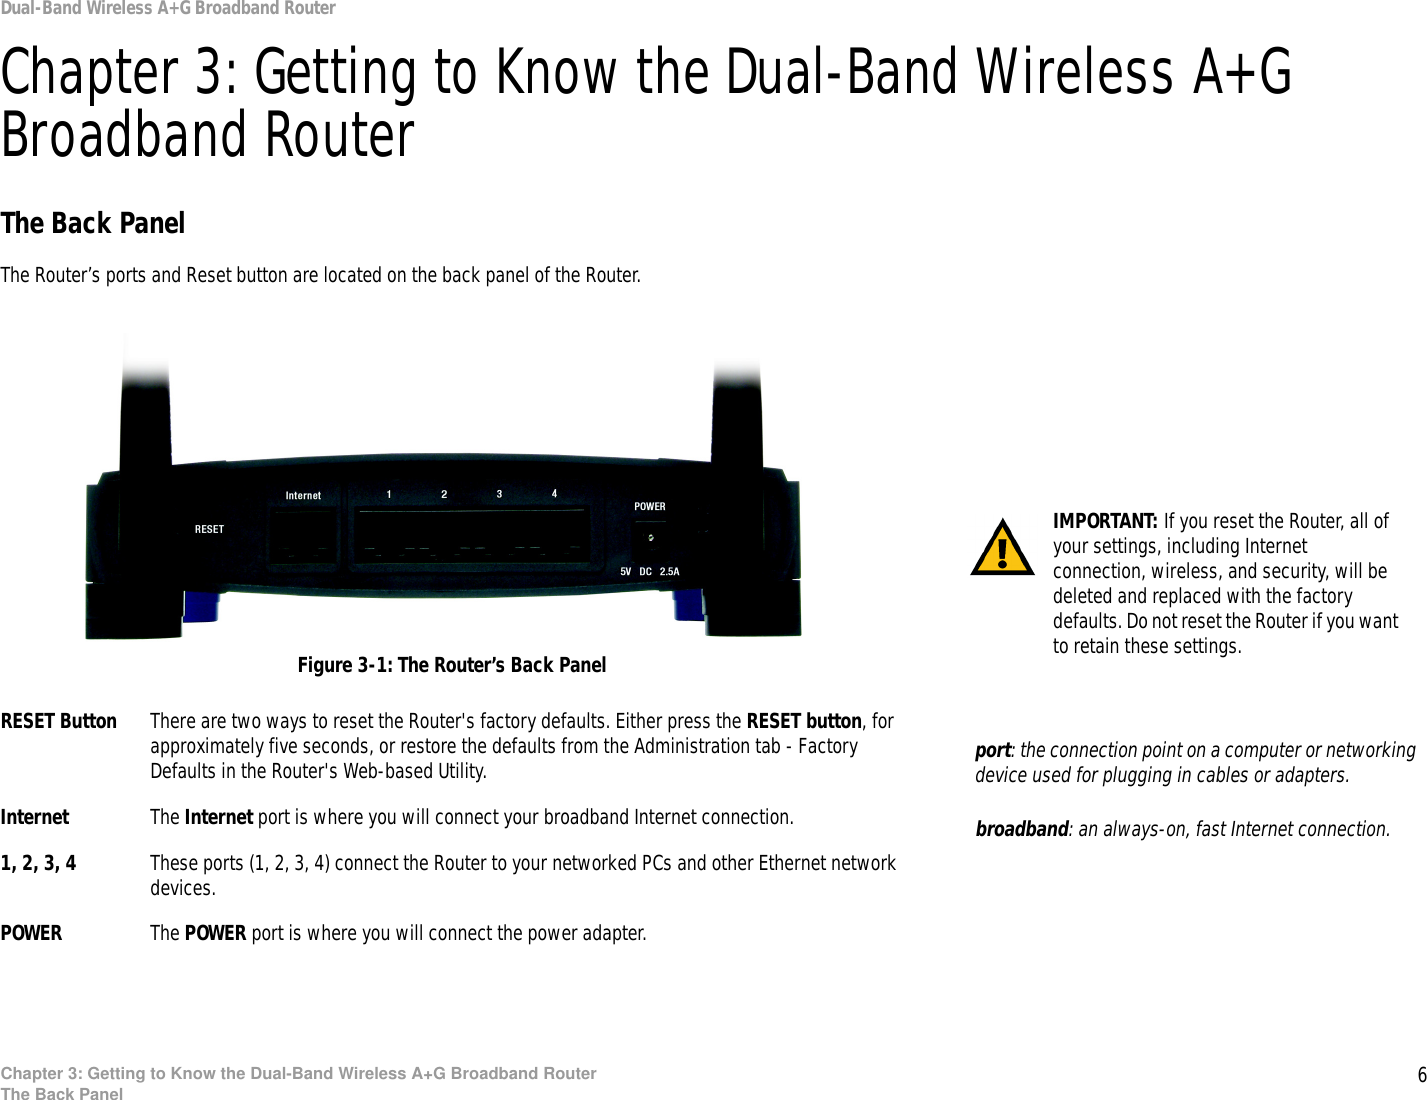 6Chapter 3: Getting to Know the Dual-Band Wireless A+G Broadband RouterThe Back PanelDual-Band Wireless A+G Broadband RouterChapter 3: Getting to Know the Dual-Band Wireless A+G Broadband RouterThe Back PanelThe Router’s ports and Reset button are located on the back panel of the Router.RESET Button There are two ways to reset the Router&apos;s factory defaults. Either press the RESET button, for approximately five seconds, or restore the defaults from the Administration tab - Factory Defaults in the Router&apos;s Web-based Utility.Internet The Internet port is where you will connect your broadband Internet connection.1, 2, 3, 4 These ports (1, 2, 3, 4) connect the Router to your networked PCs and other Ethernet network devices.POWER The POWER port is where you will connect the power adapter.Figure 3-1: The Router’s Back PanelIMPORTANT: If you reset the Router, all of your settings, including Internet connection, wireless, and security, will be deleted and replaced with the factory defaults. Do not reset the Router if you want to retain these settings.broadband: an always-on, fast Internet connection.port: the connection point on a computer or networking device used for plugging in cables or adapters.